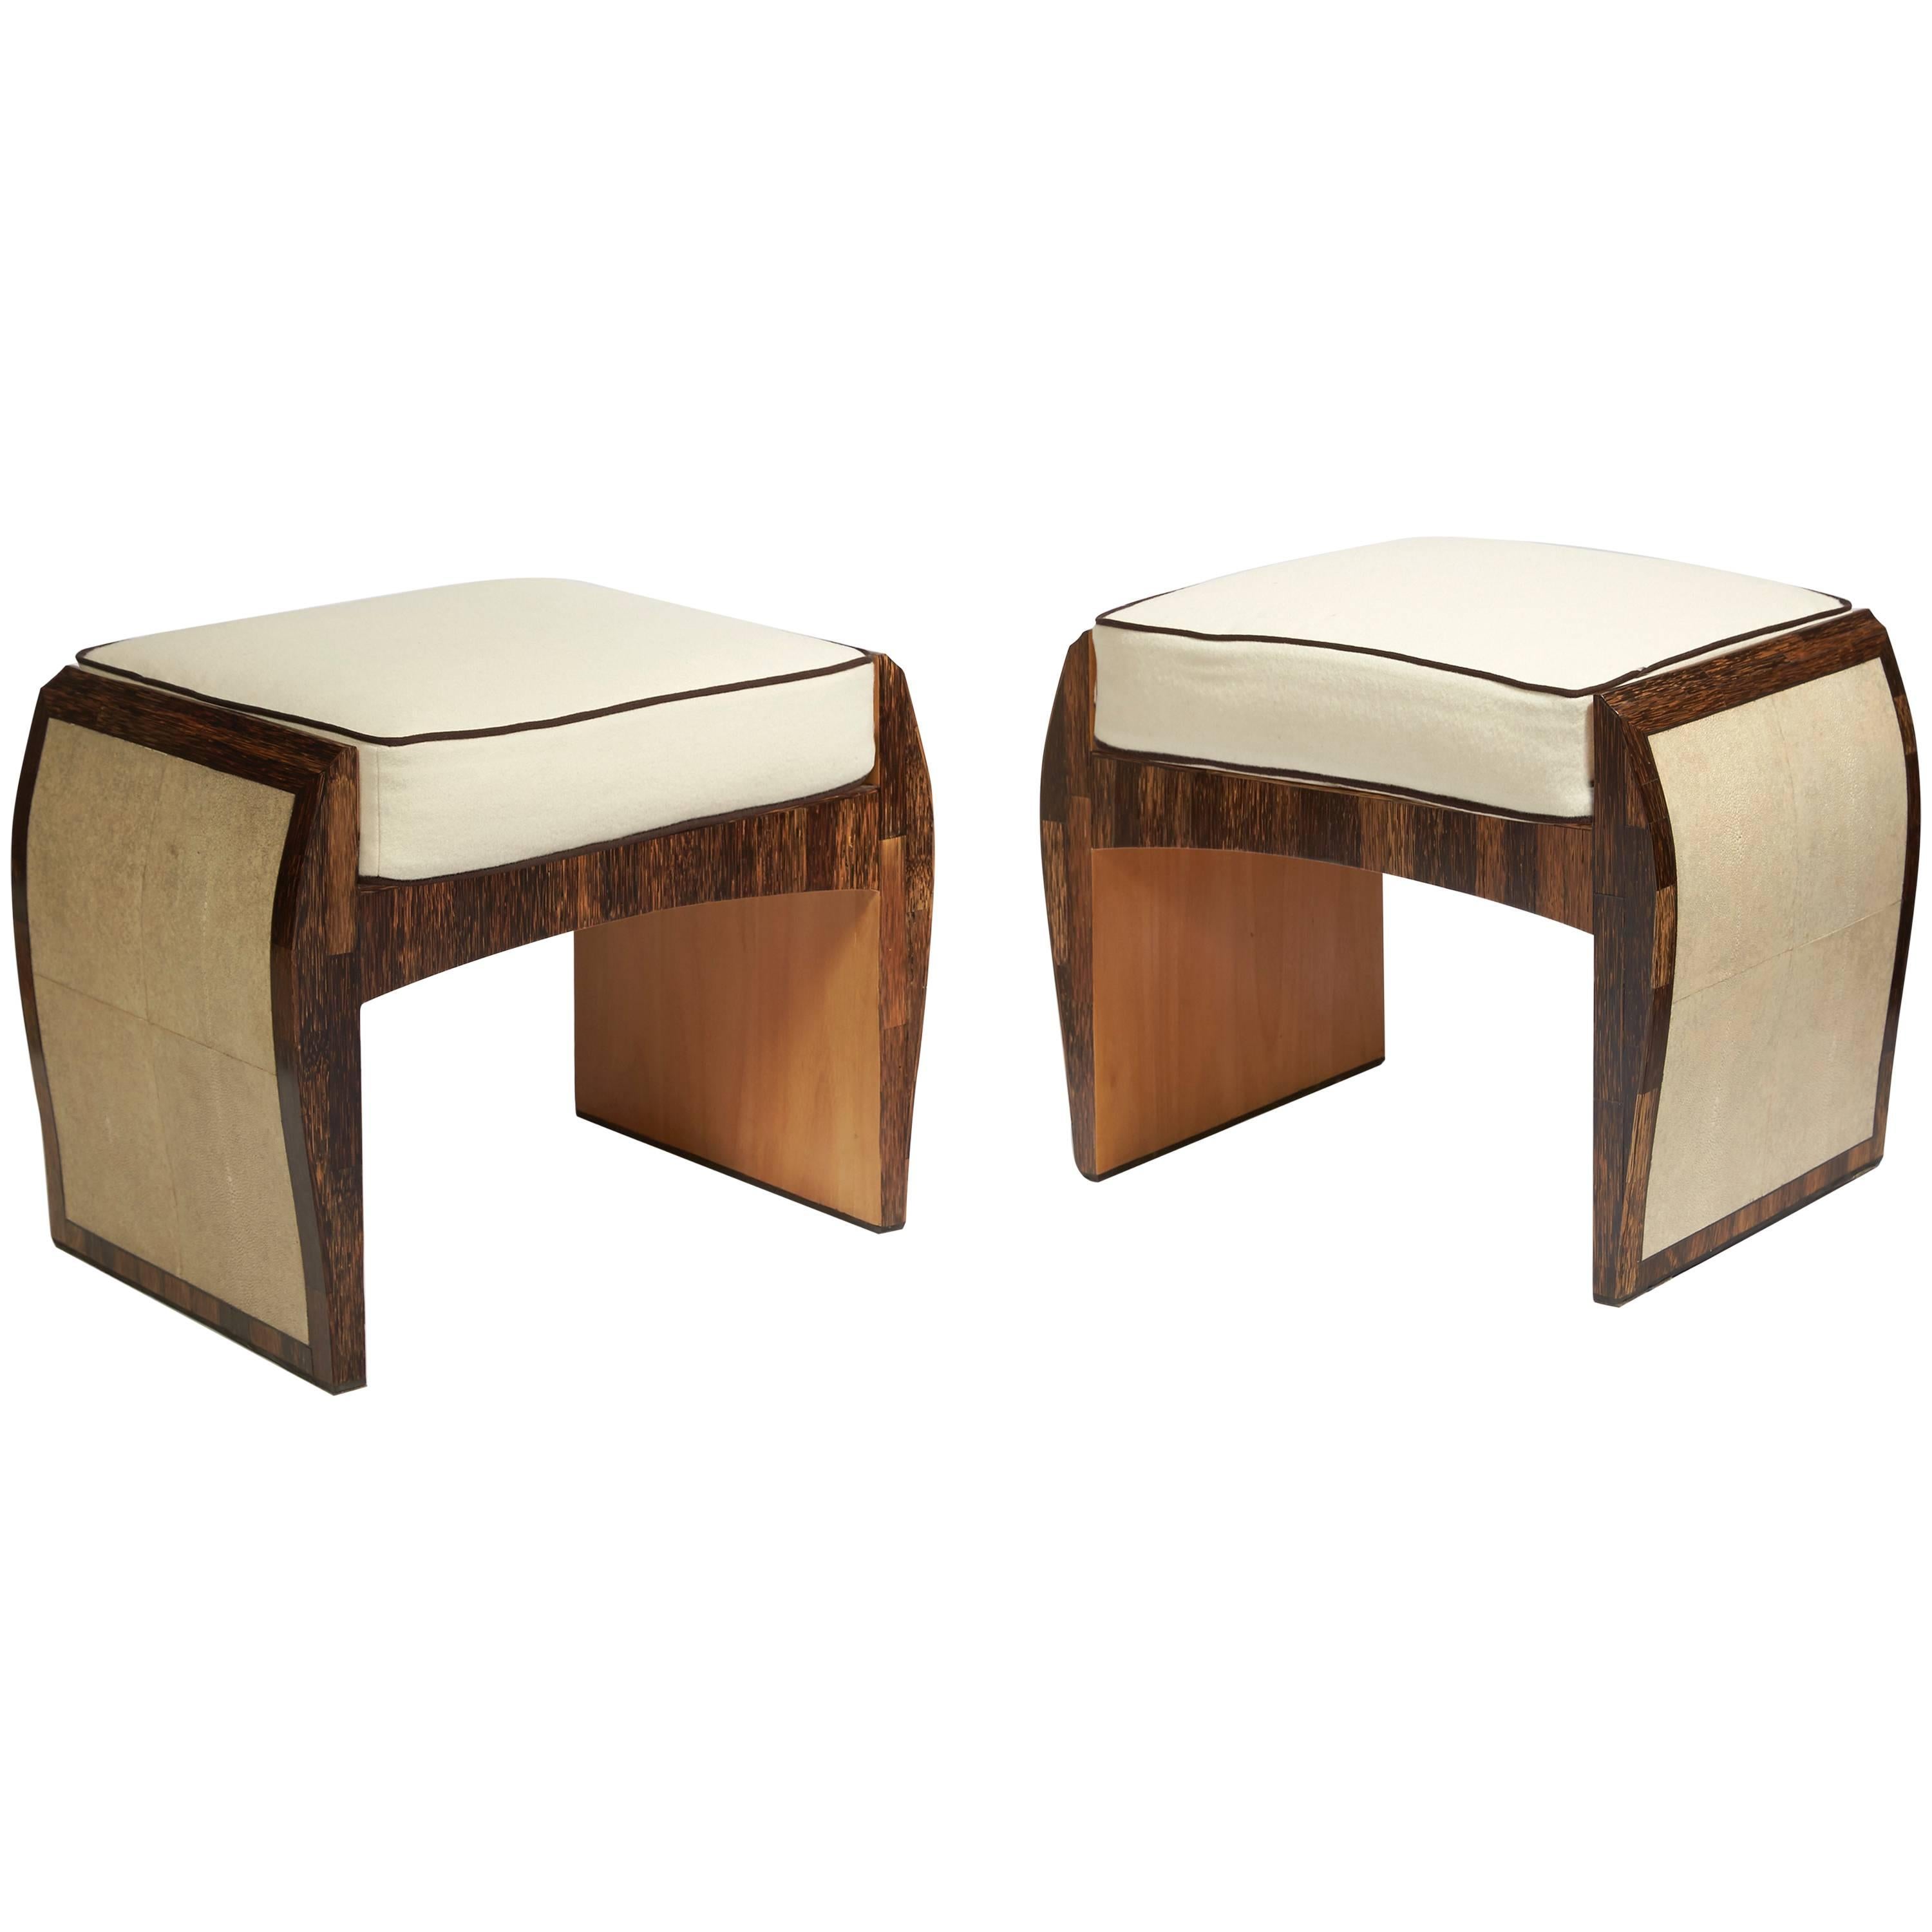 Pair of Stools by Ria & Your Augousti